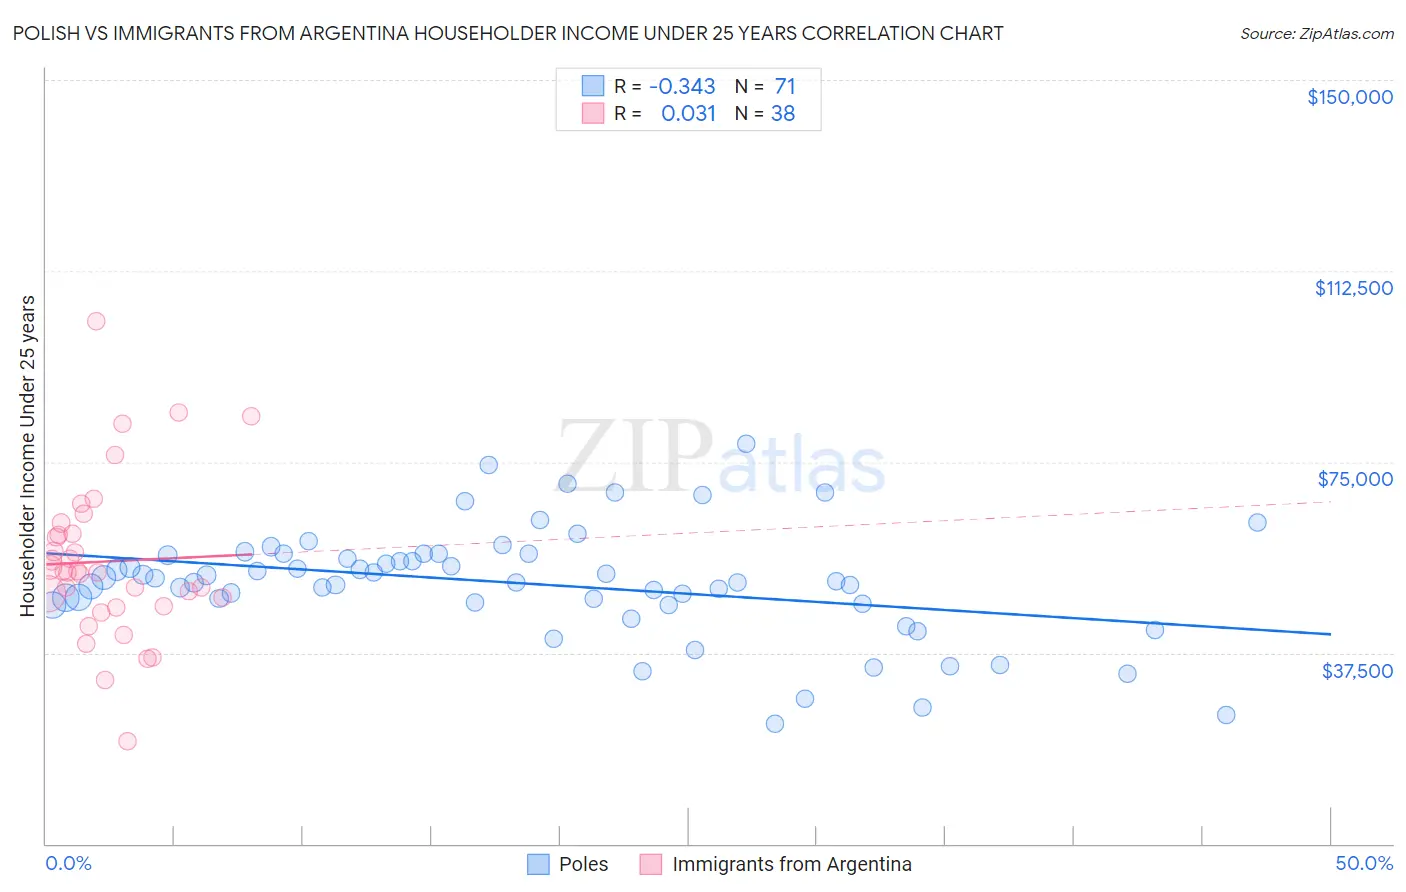 Polish vs Immigrants from Argentina Householder Income Under 25 years